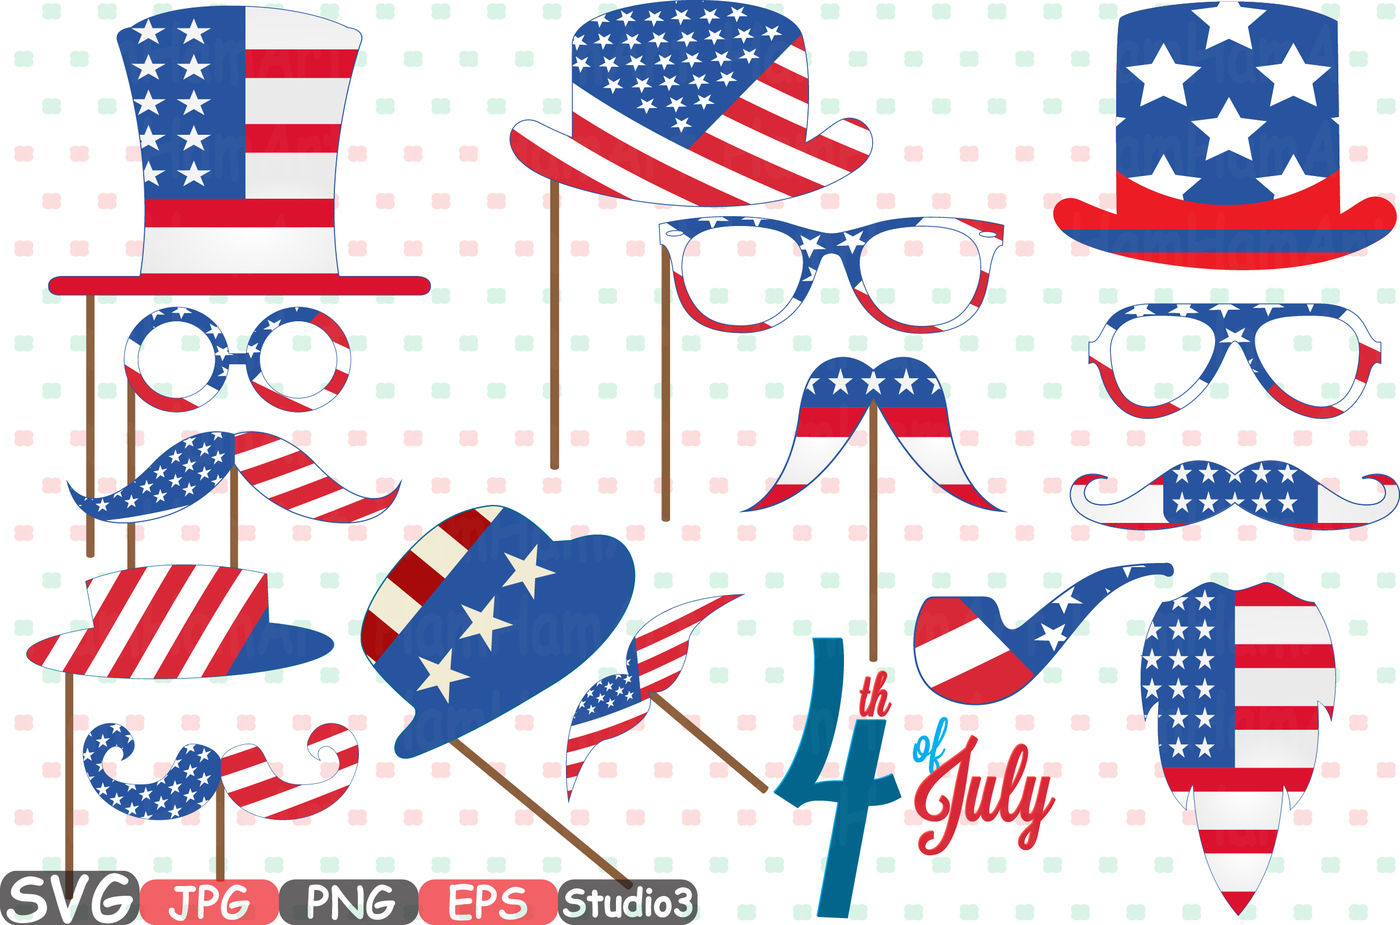 Props 4th Of July Party Photo Booth Silhouette Svg Party Birthday Clipart Bunting Cutting Files Digital Svg Eps Png Jpg Vinyl Sale Clipart Face Clip Art Digital Graphics Hat Glasses Mustache Happy